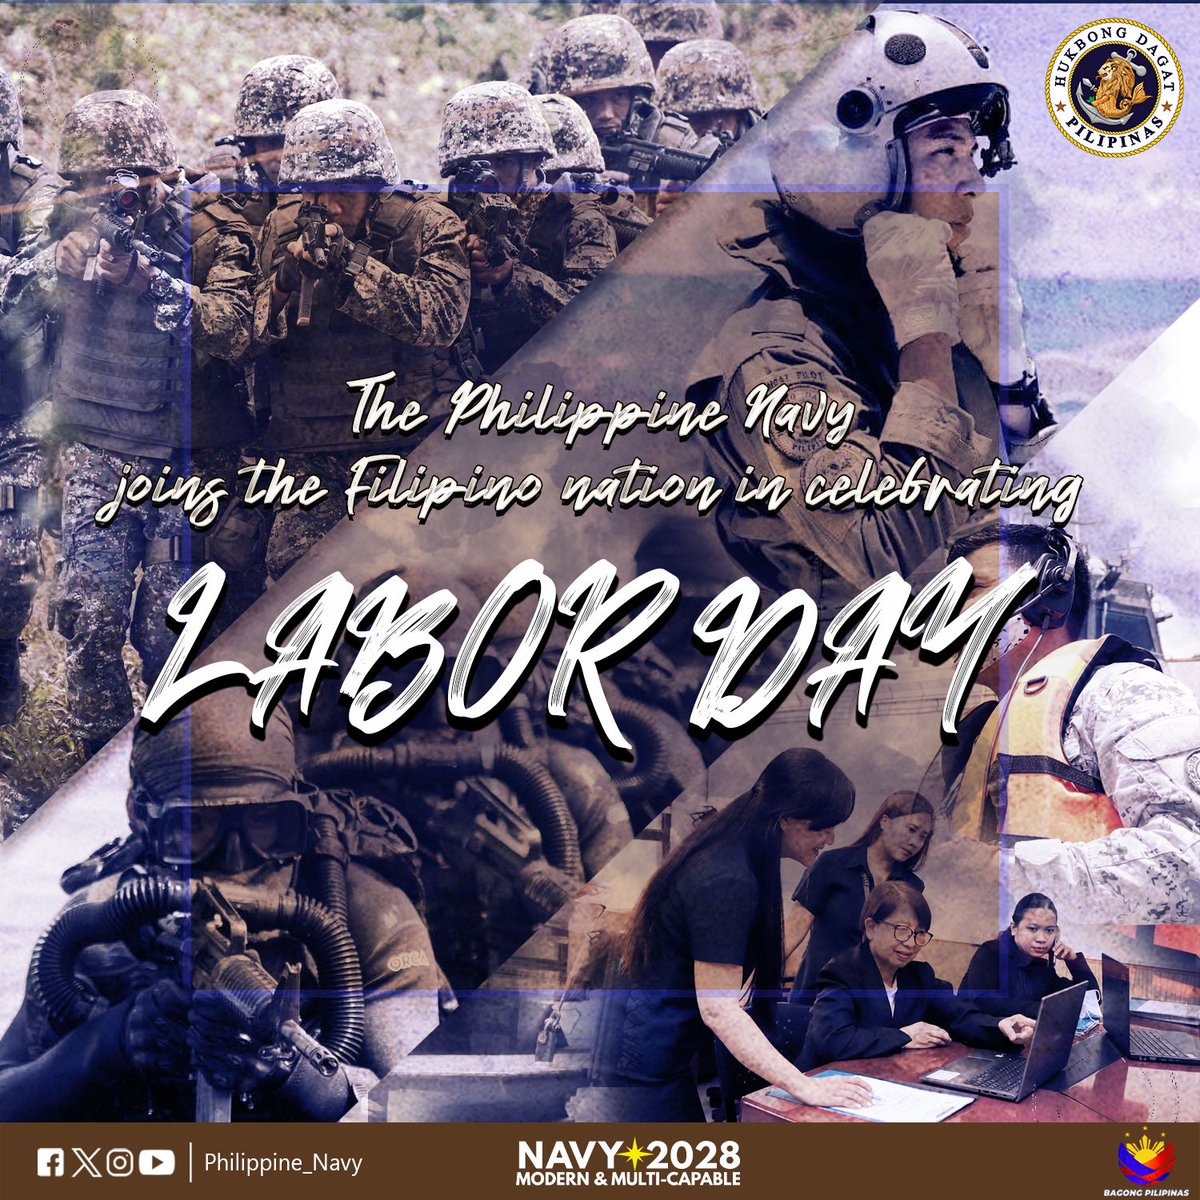 The Philippine Navy salutes the hardworking spirit of our nation’s labor force, including our dedicated sailors, marines, and civilian human resources. Guardians of the Seas: Ensuring National Sovereignty, Security and Stability #ModernandMultiCapablePHNavy #AFPyoucanTRUST